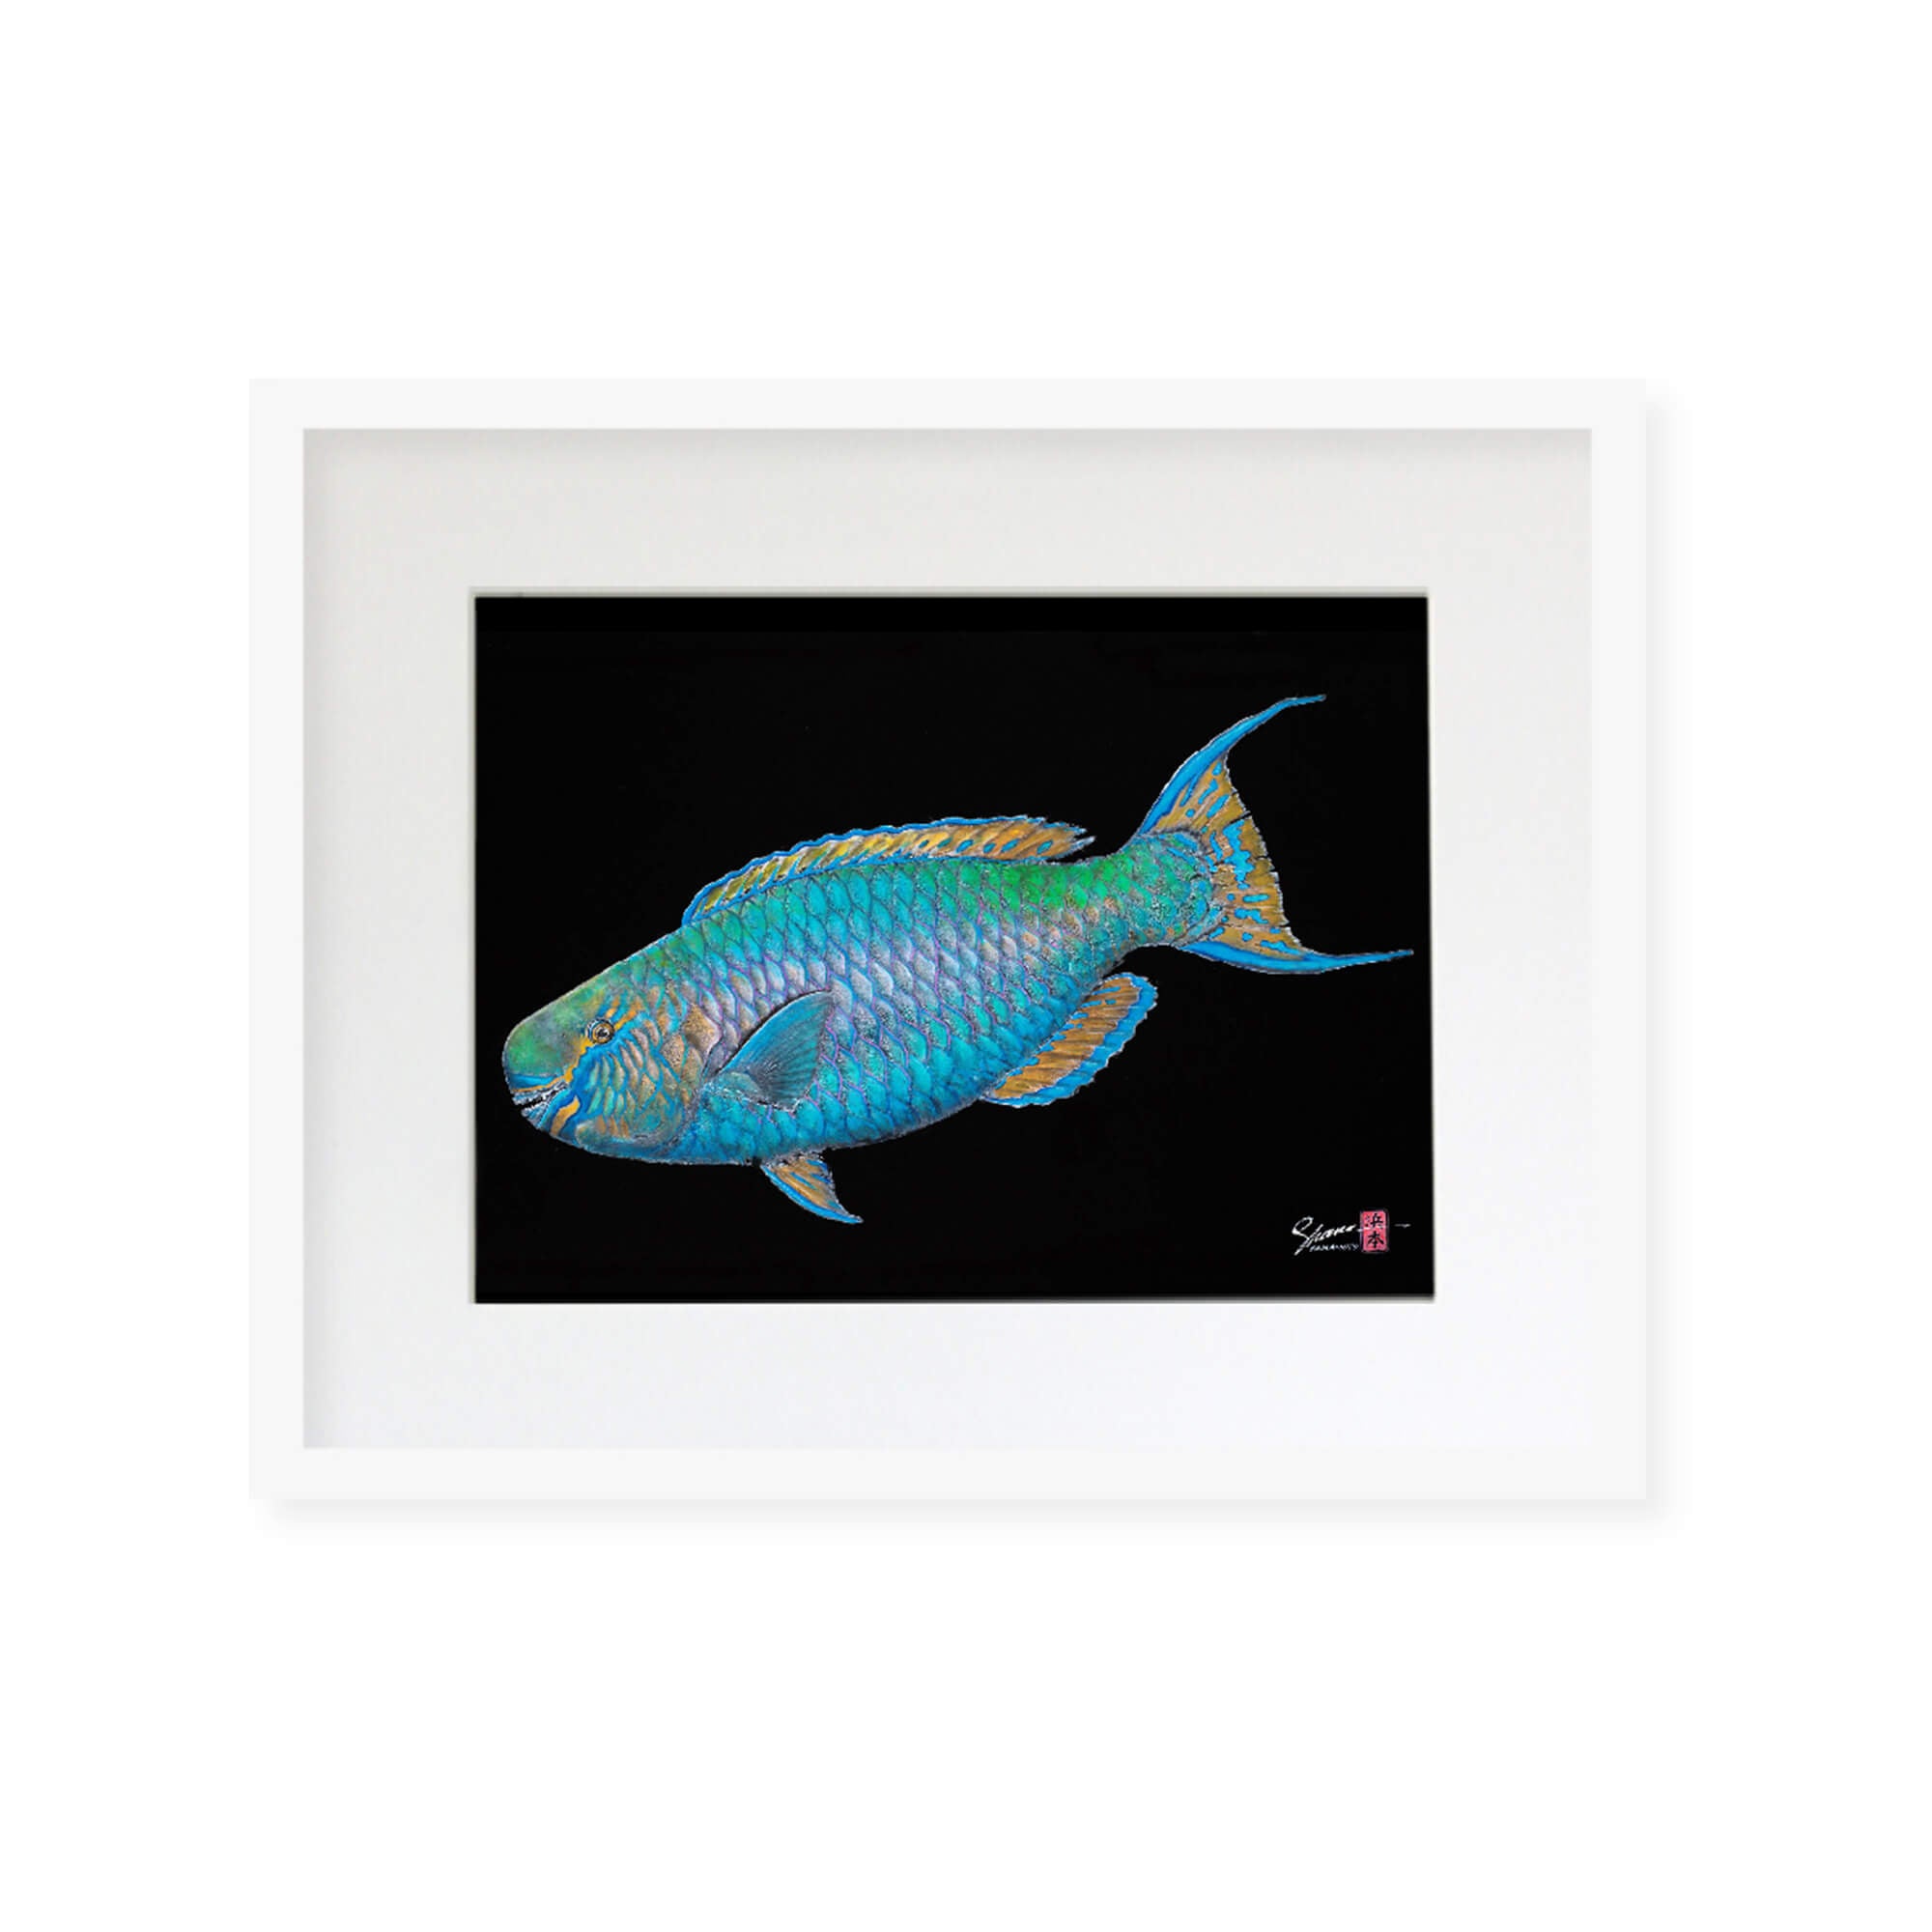 Framed matted print of Uhu (also known as Parrot Fish) by Hawaii gyotaku artist Shane Hamamoto